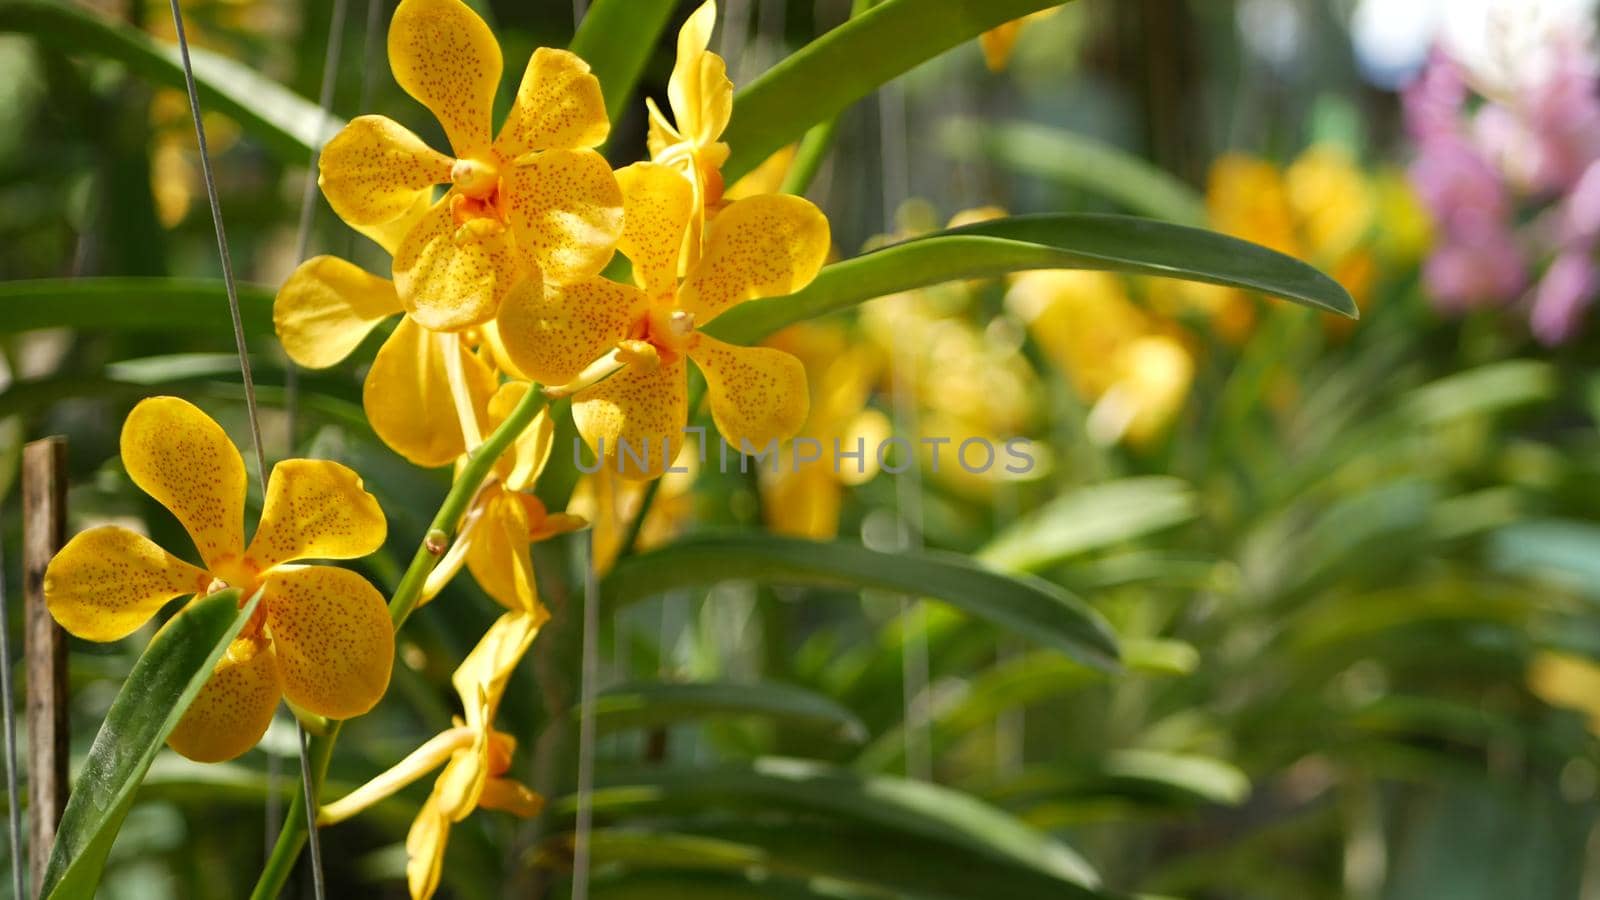 Blurred macro close up, colorful tropical orchid flower in spring garden, tender petals among sunny lush foliage. Abstract natural exotic background with copy space. Floral blossom and leaves pattern.